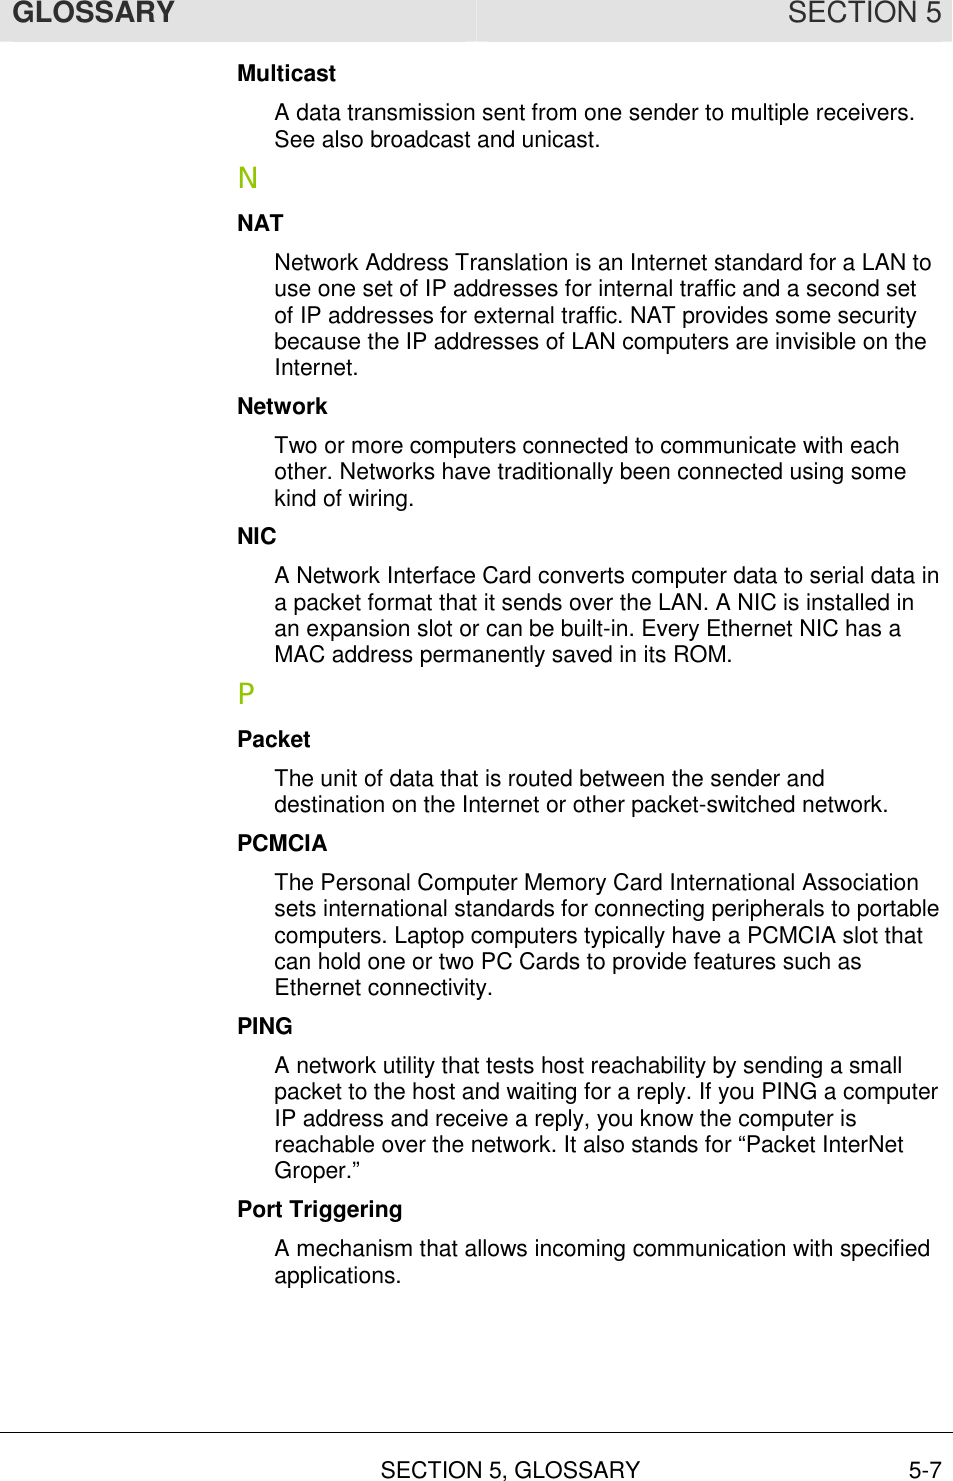 GLOSSARY SECTION 5  SECTION 5, GLOSSARY 5-7 Multicast A data transmission sent from one sender to multiple receivers. See also broadcast and unicast. N NAT Network Address Translation is an Internet standard for a LAN to use one set of IP addresses for internal traffic and a second set of IP addresses for external traffic. NAT provides some security because the IP addresses of LAN computers are invisible on the Internet. Network Two or more computers connected to communicate with each other. Networks have traditionally been connected using some kind of wiring. NIC A Network Interface Card converts computer data to serial data in a packet format that it sends over the LAN. A NIC is installed in an expansion slot or can be built-in. Every Ethernet NIC has a MAC address permanently saved in its ROM. P Packet The unit of data that is routed between the sender and destination on the Internet or other packet-switched network.  PCMCIA The Personal Computer Memory Card International Association sets international standards for connecting peripherals to portable computers. Laptop computers typically have a PCMCIA slot that can hold one or two PC Cards to provide features such as Ethernet connectivity. PING A network utility that tests host reachability by sending a small packet to the host and waiting for a reply. If you PING a computer IP address and receive a reply, you know the computer is reachable over the network. It also stands for “Packet InterNet Groper.” Port Triggering A mechanism that allows incoming communication with specified applications.  